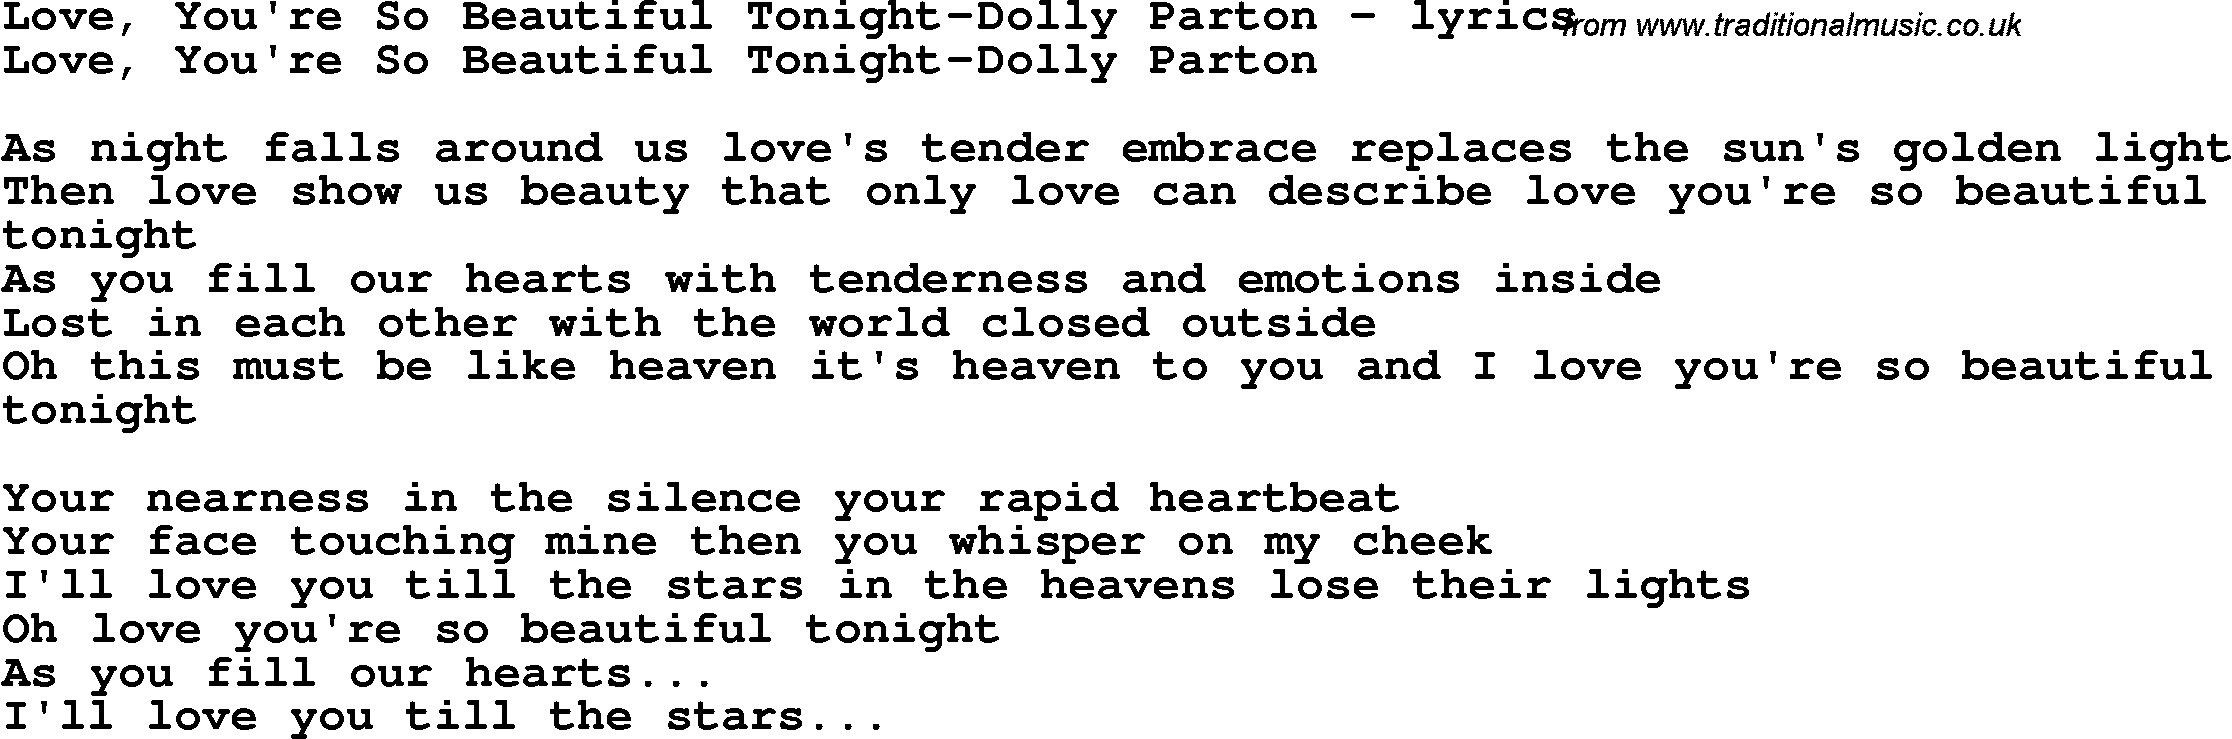 Love Song Lyrics for: Love, You're So Beautiful Tonight-Dolly Parton